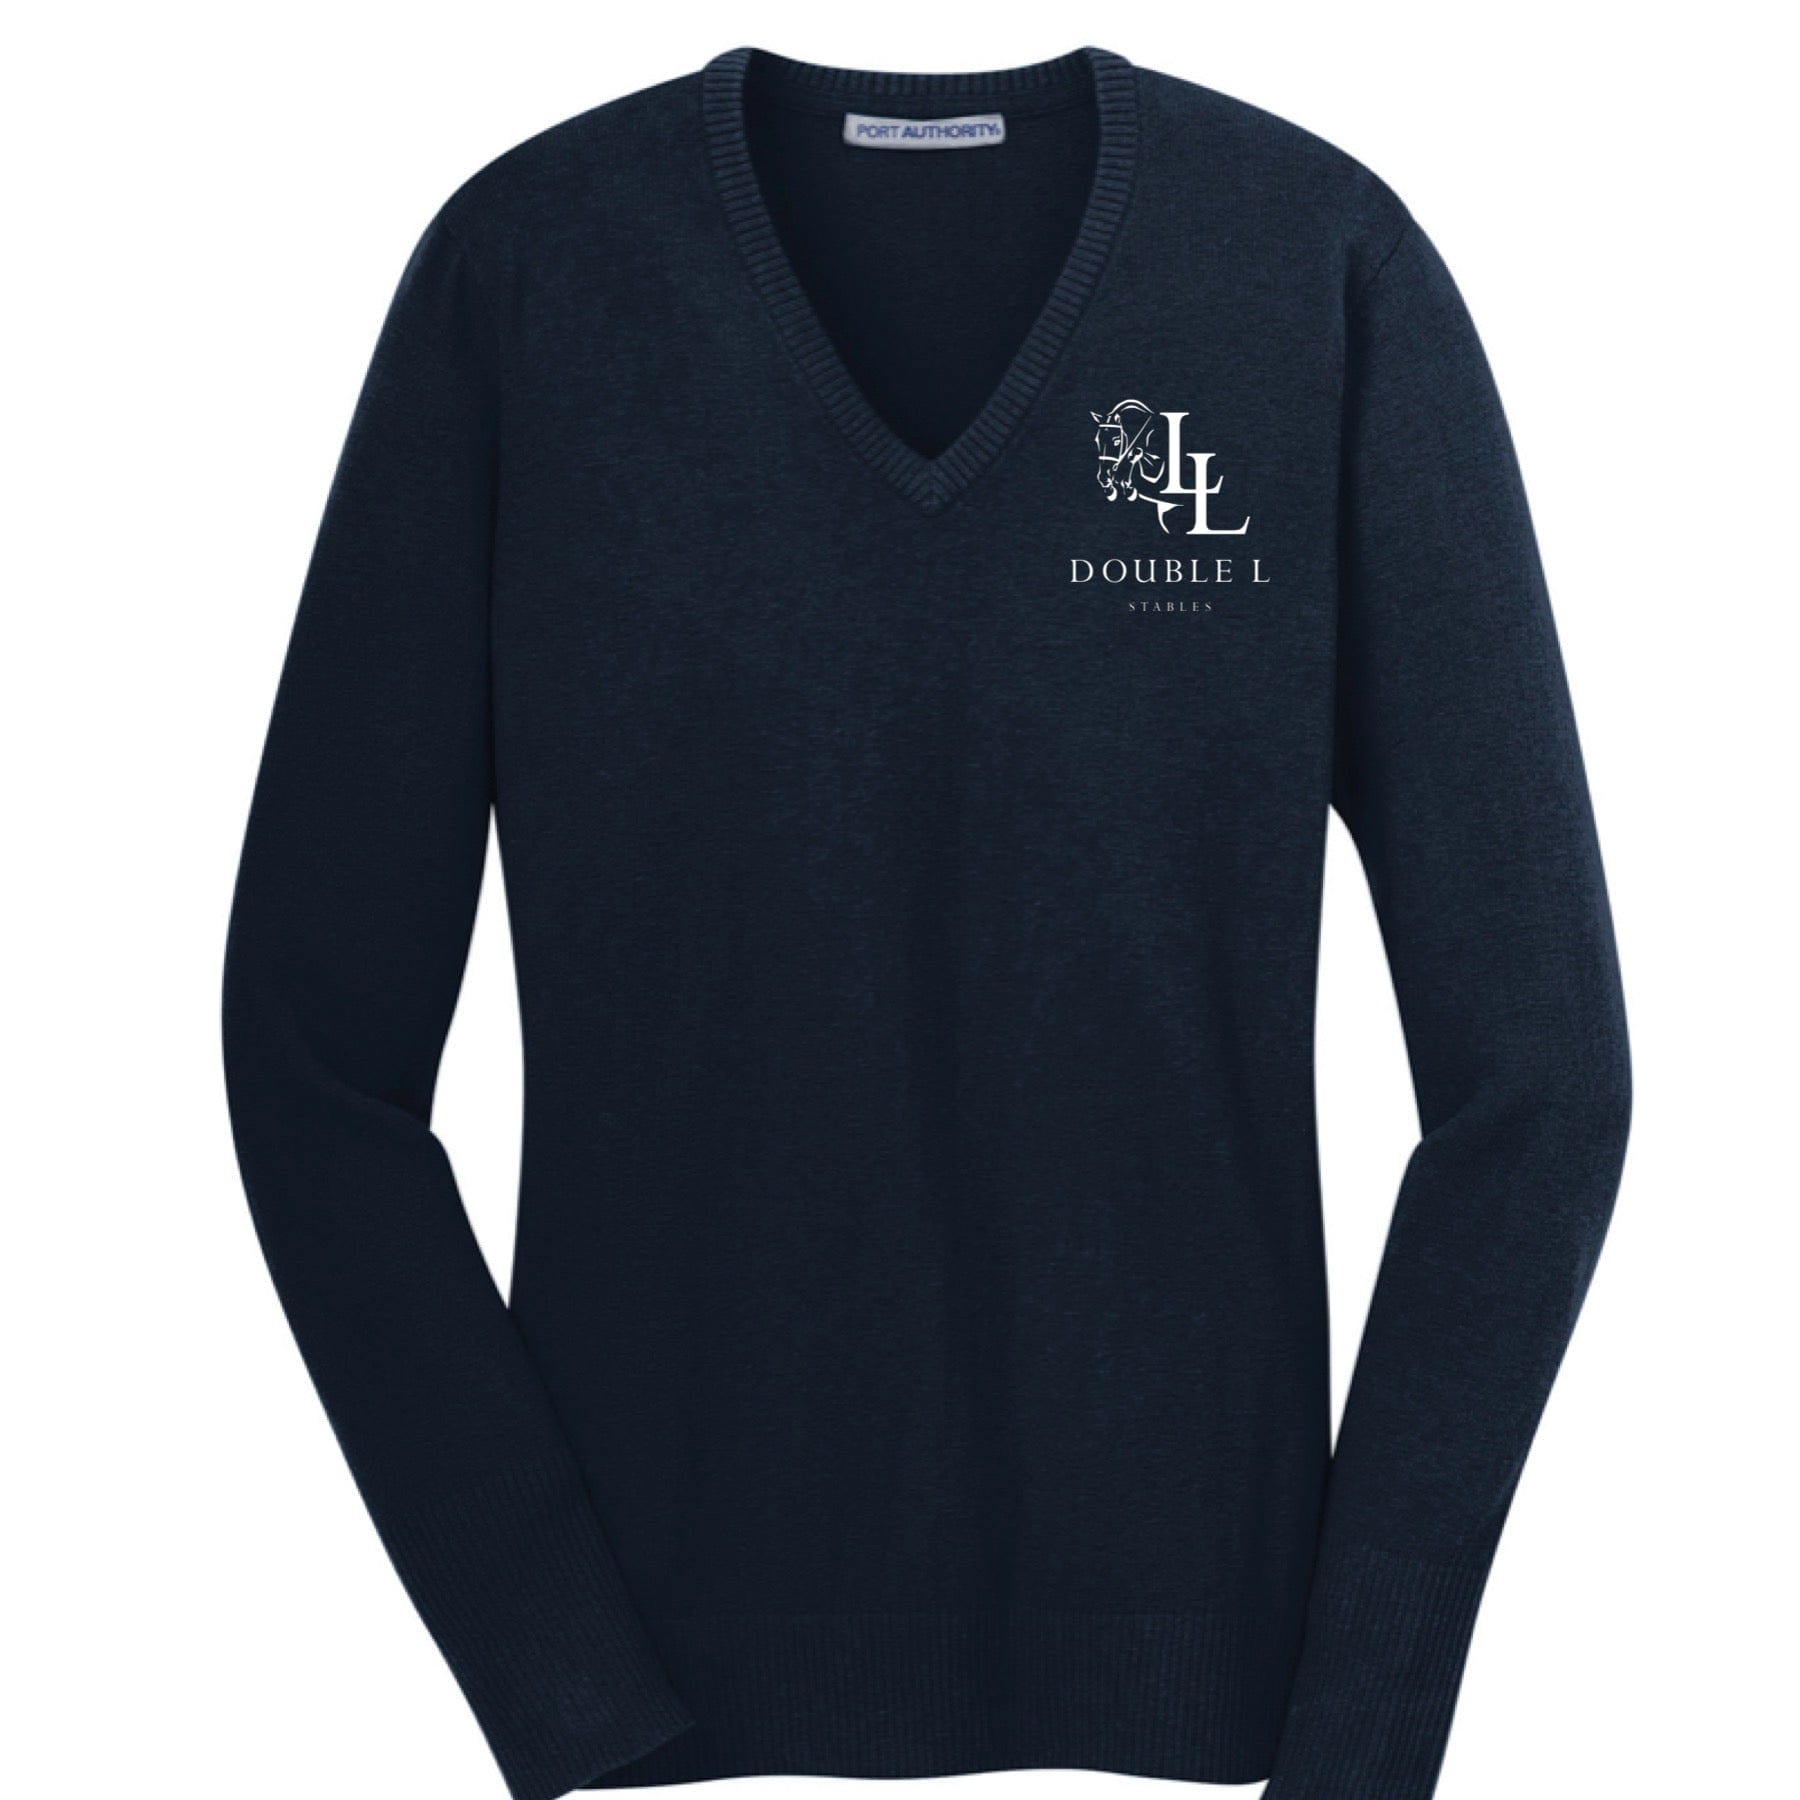 Equestrian Team Apparel Double L Stables V neck sweater equestrian team apparel online tack store mobile tack store custom farm apparel custom show stable clothing equestrian lifestyle horse show clothing riding clothes horses equestrian tack store